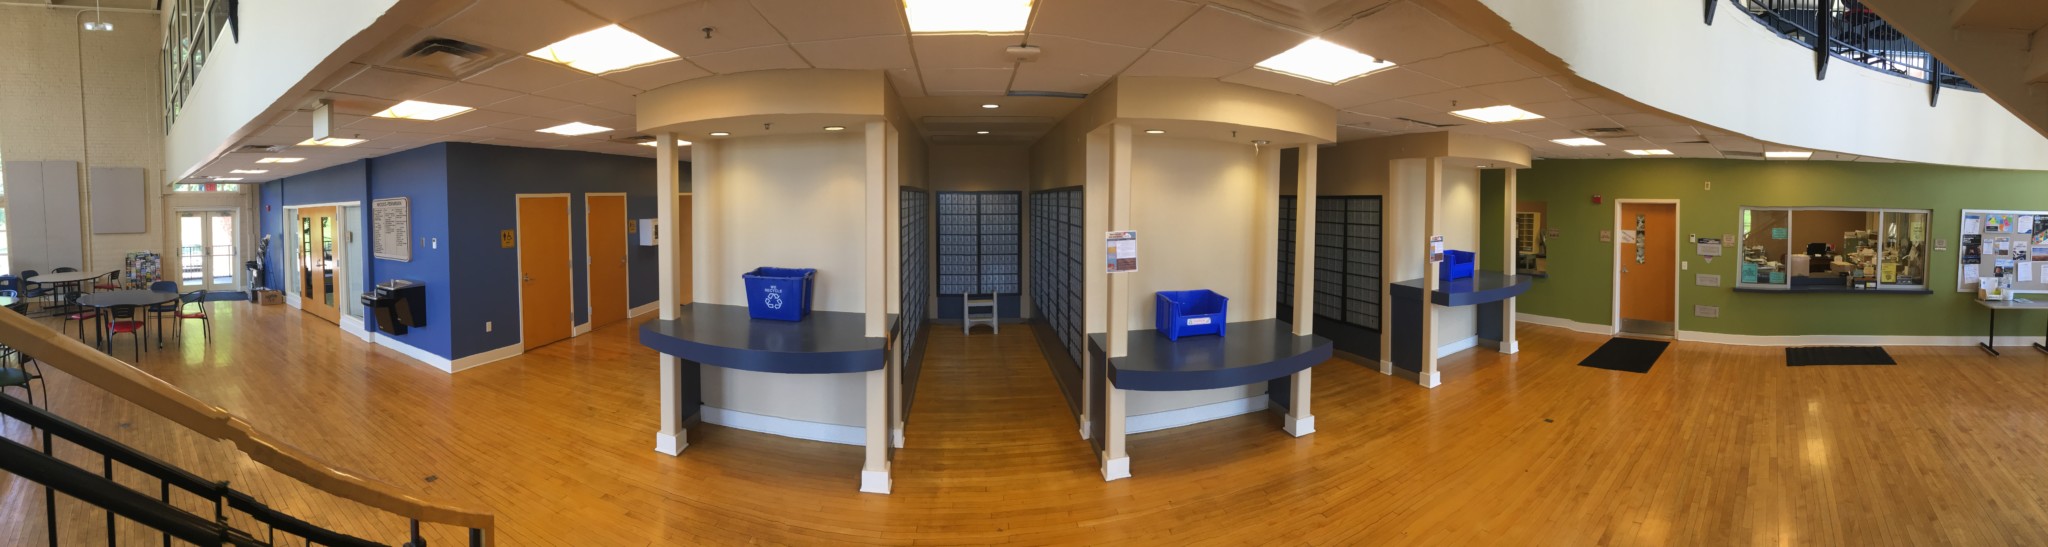 Inside the College Post Office